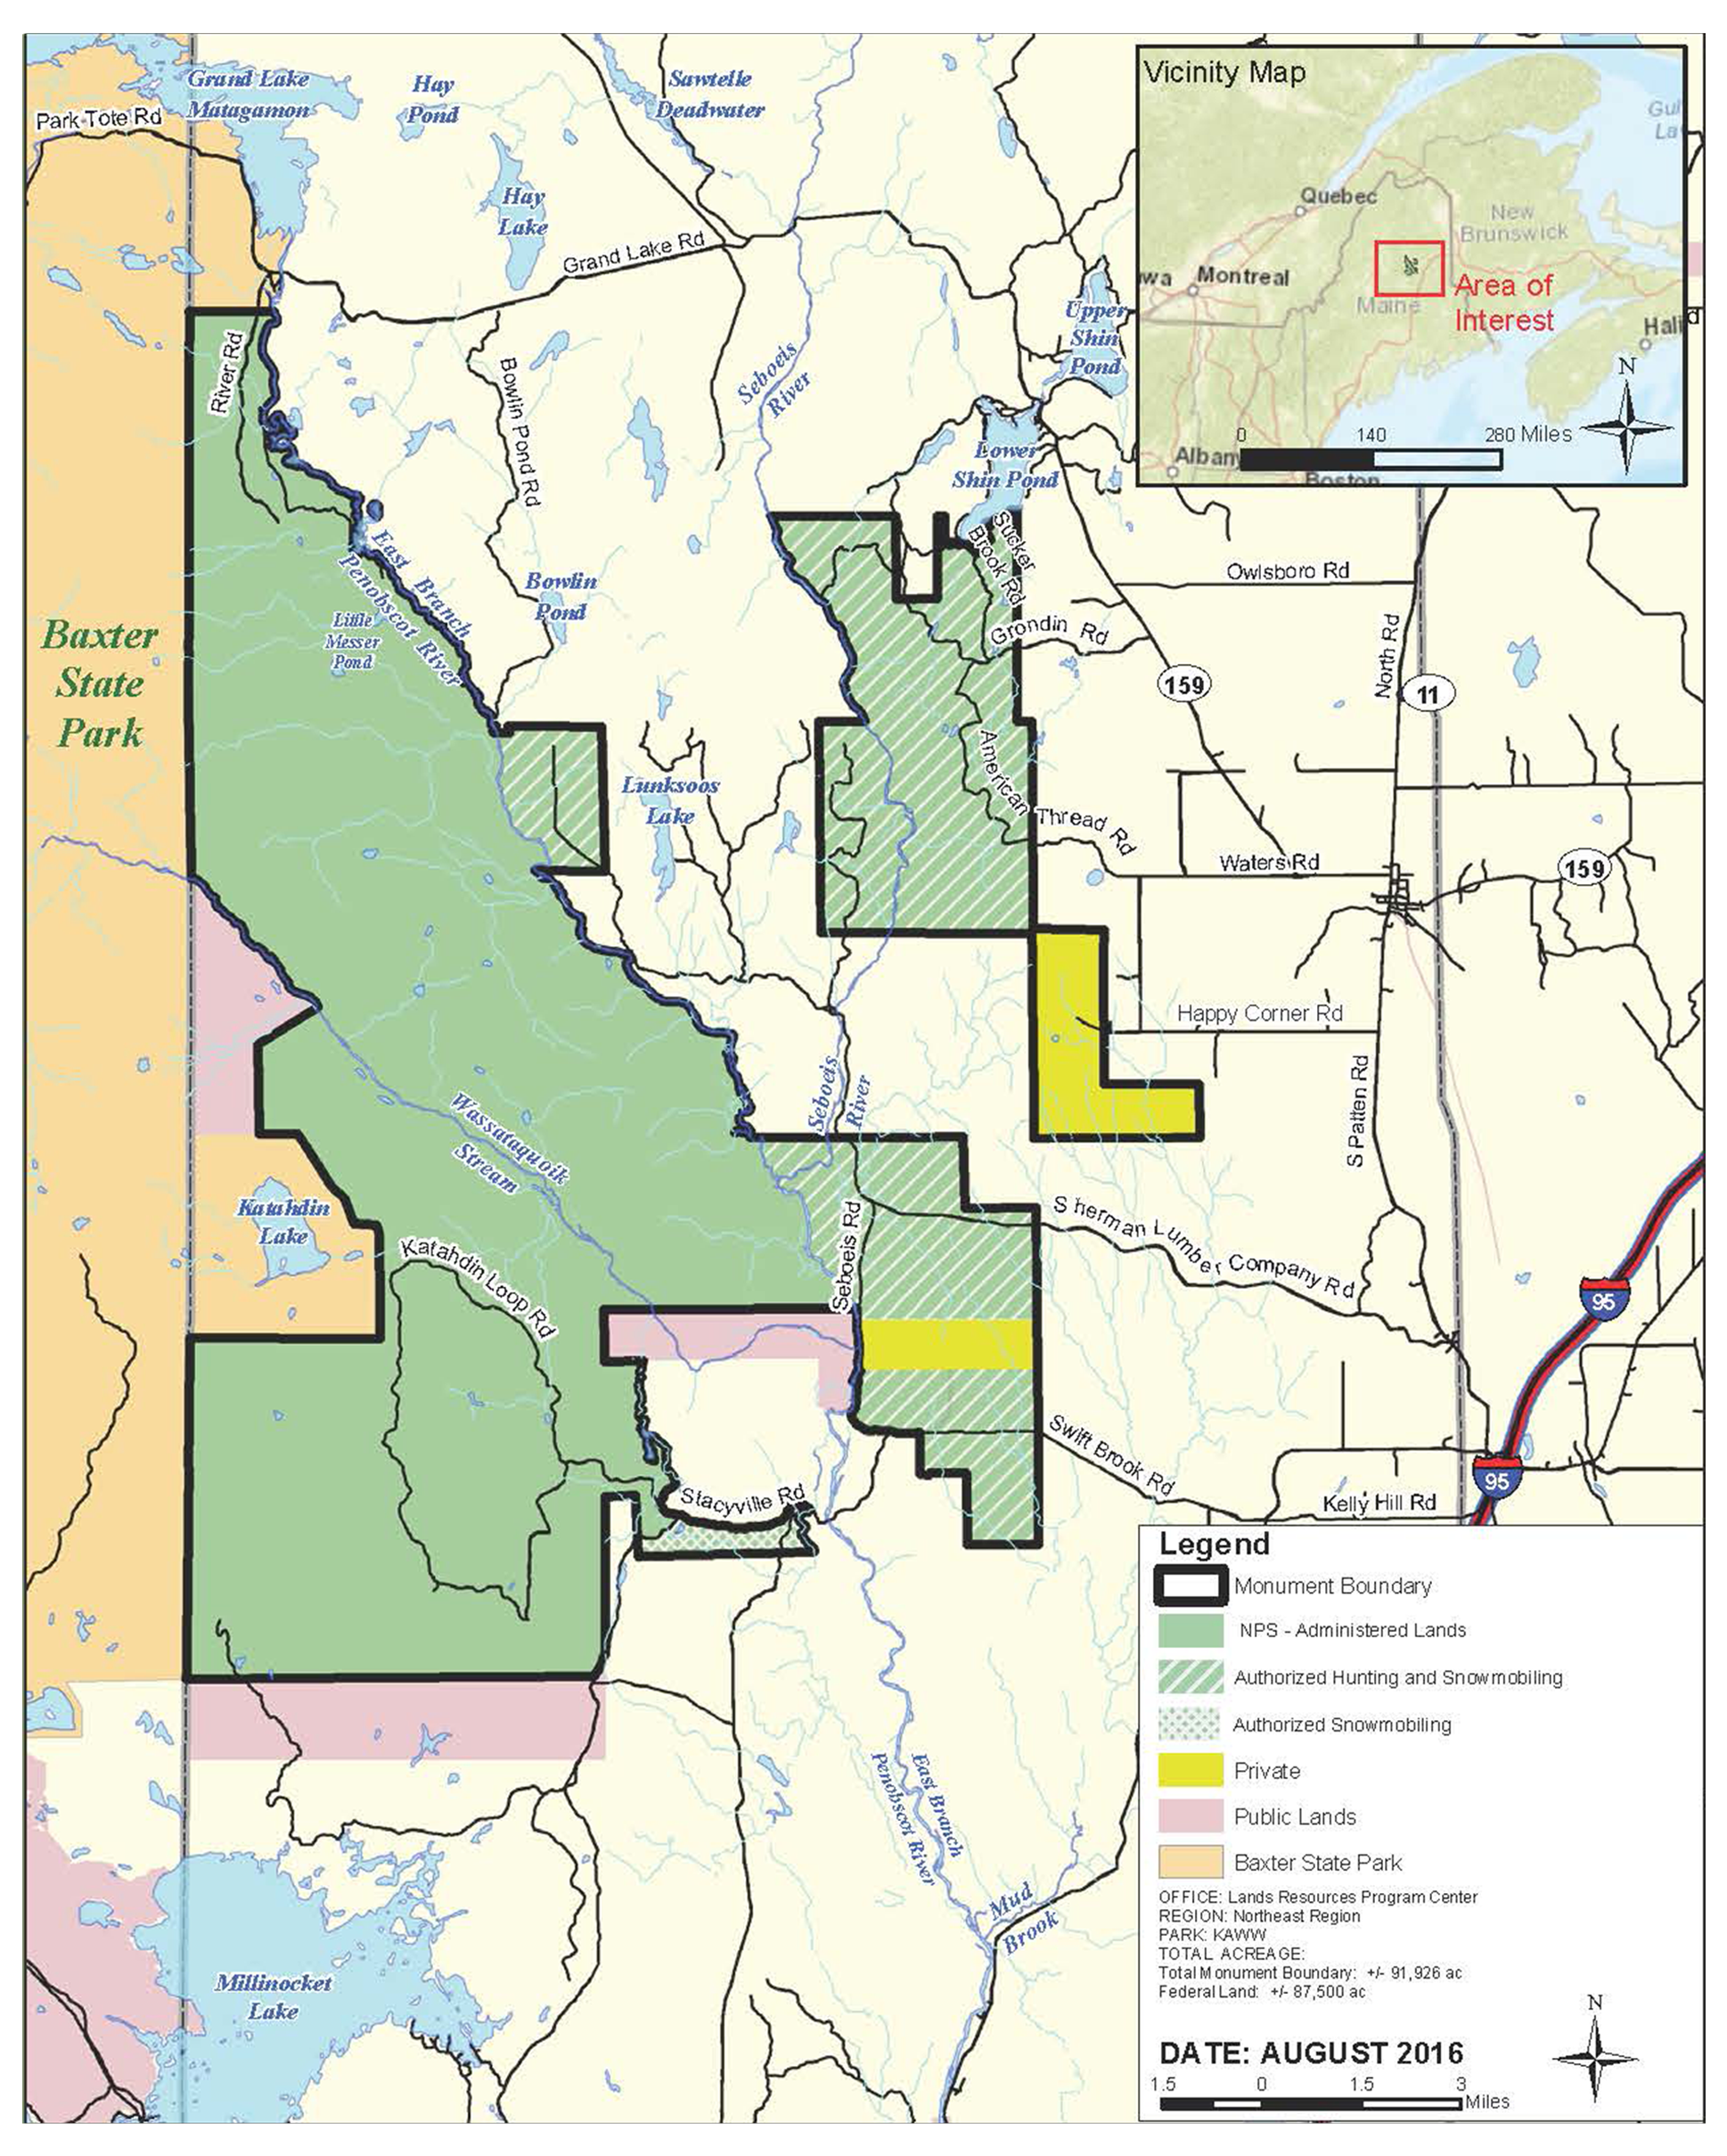 A map showing how areas of land are used and divided in the Katahdin Region. The map shows the monument boundaries, where hunting and snowmobiling are authorized, and what type of land ownership is next to the monument.